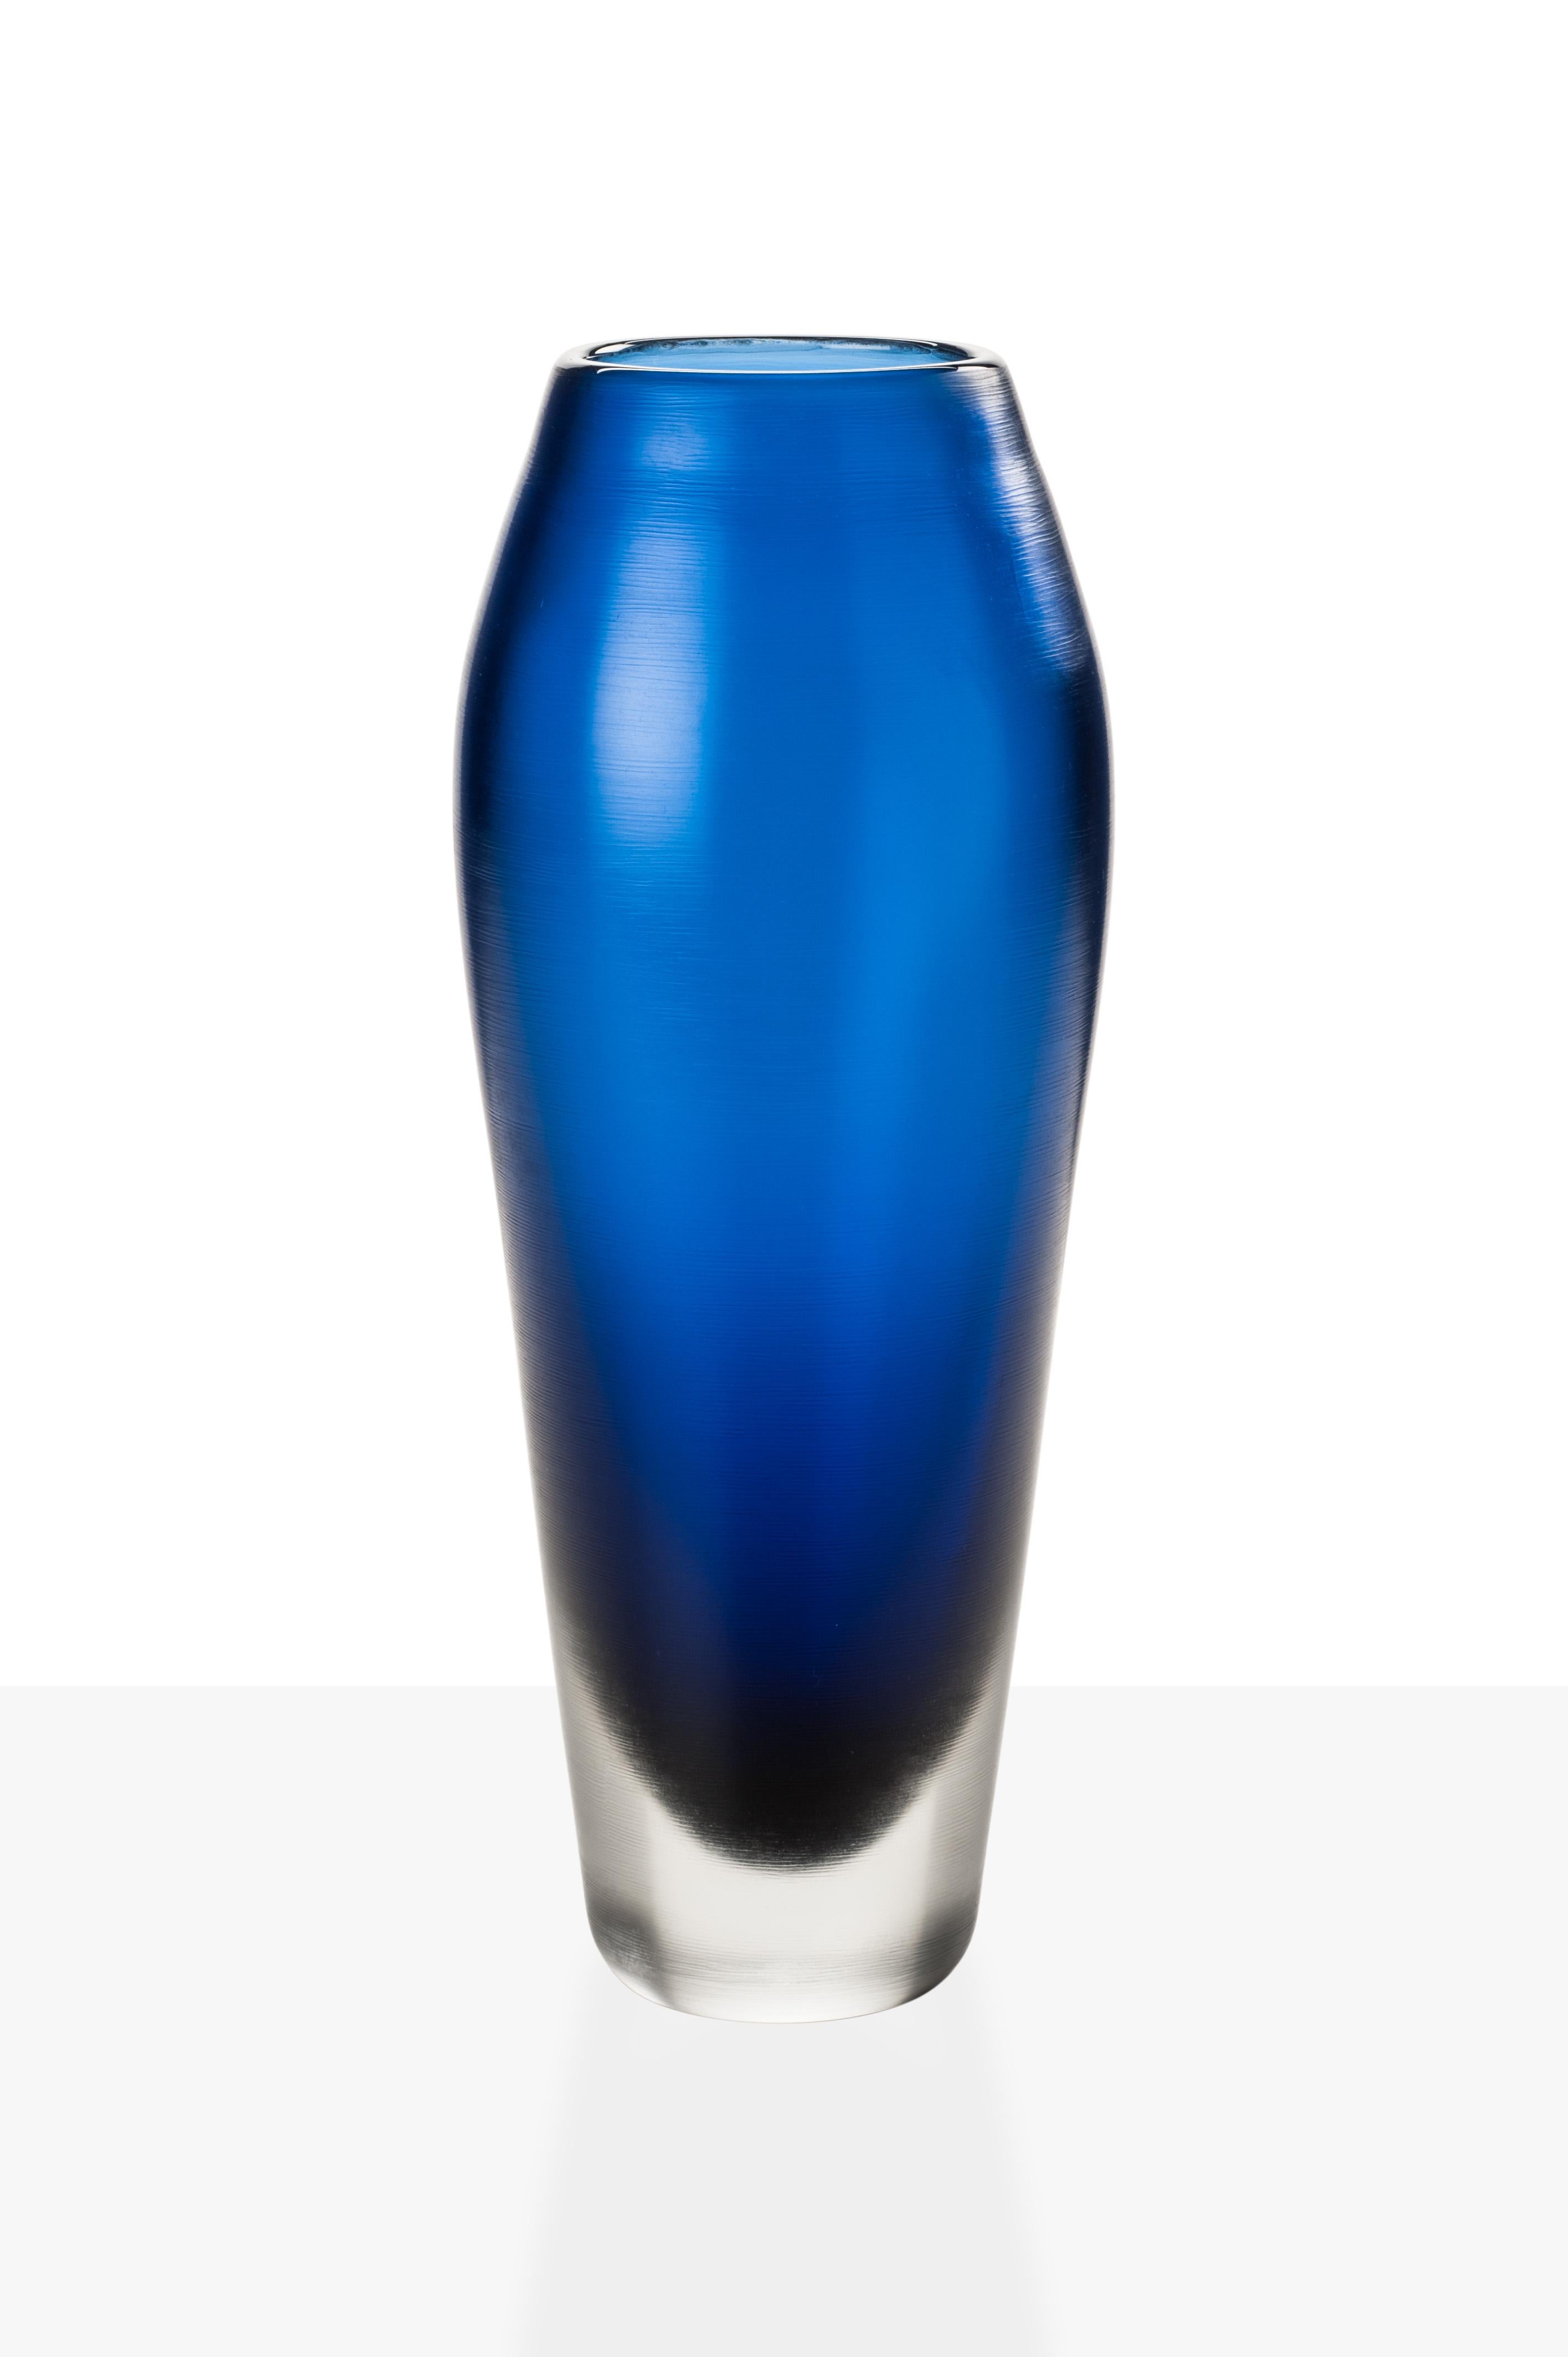 Incisi glass vase collection, designed by Paolo Venini and manufactured by Venini, feature an engraved surface. Originally designed in 1956. Numbered edition per year, marine blue versions are available in a limited edition of 19 art pieces. Indoor